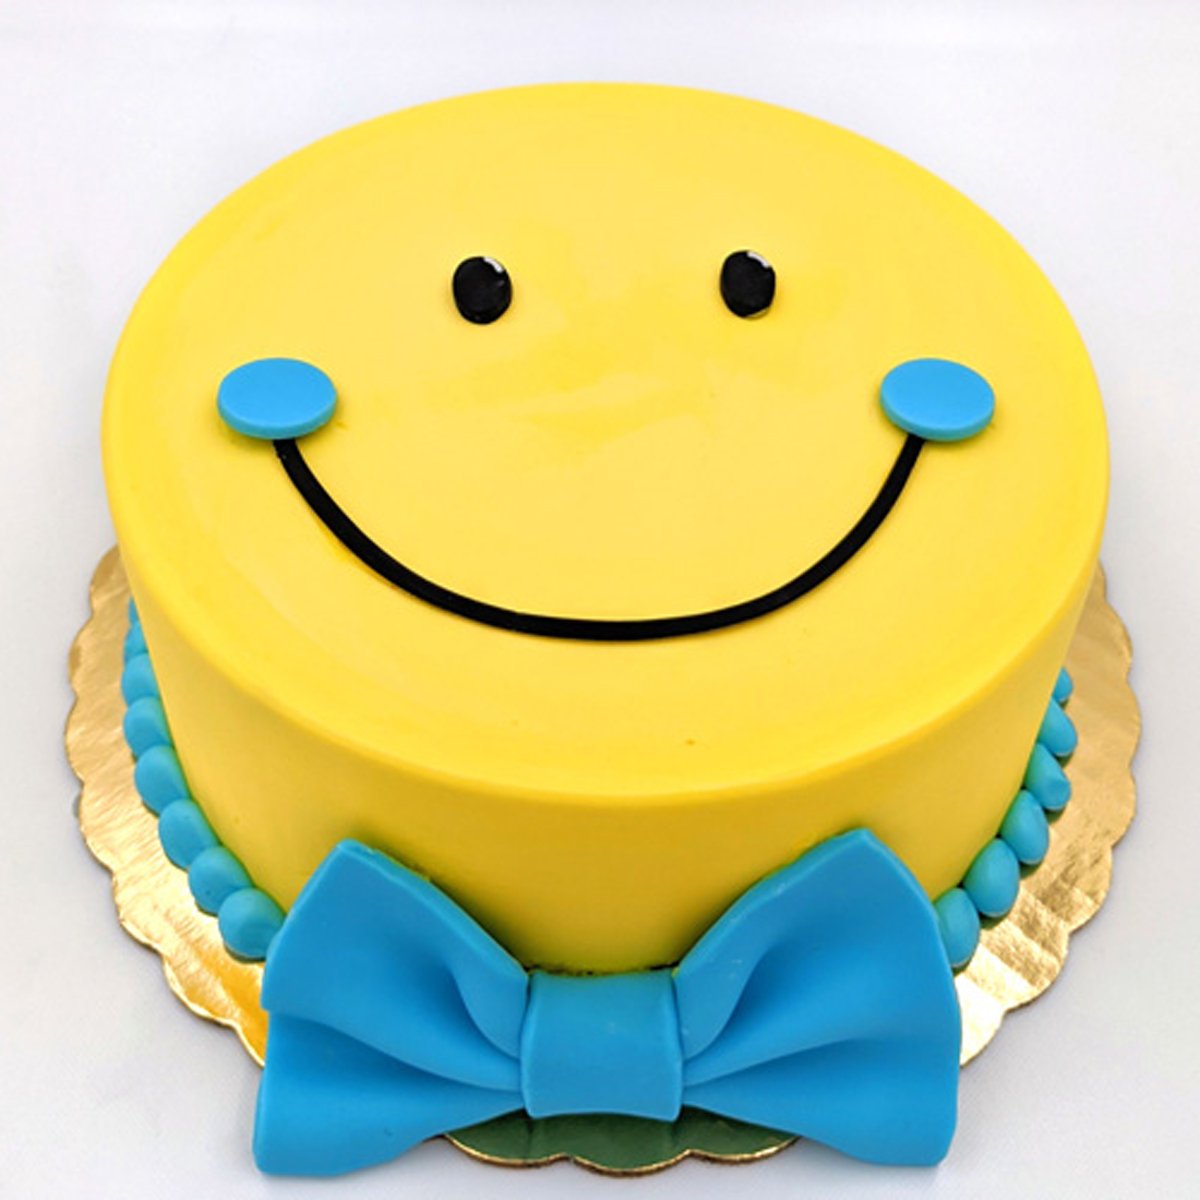 Buy 5 Pcs Smiley Face Birthday Candles, Smile Emoji Candles, Birthday Cake  Decorations Online at Low Prices in India - Amazon.in